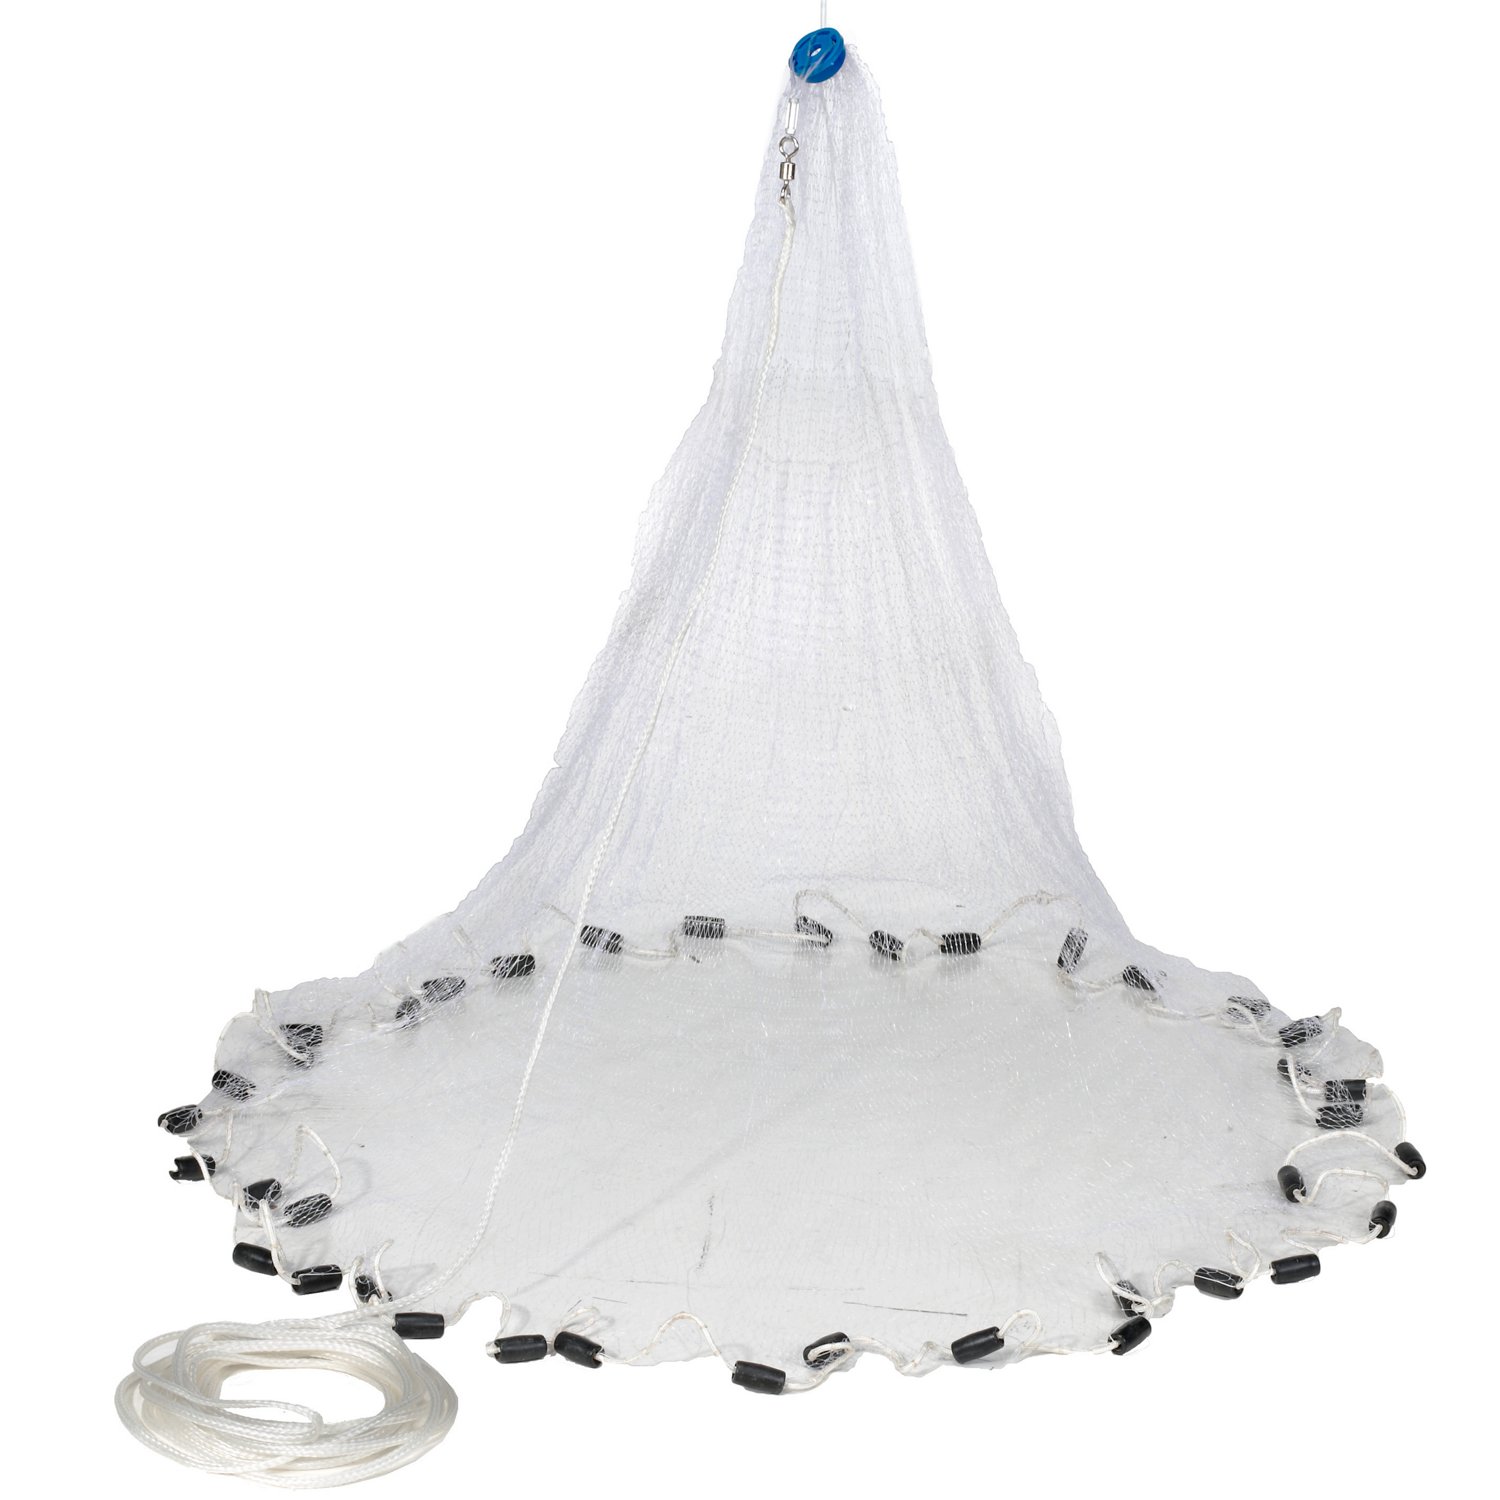 Fitec RS750 Series Super Spreader Ft Cast Net Academy, 59% OFF